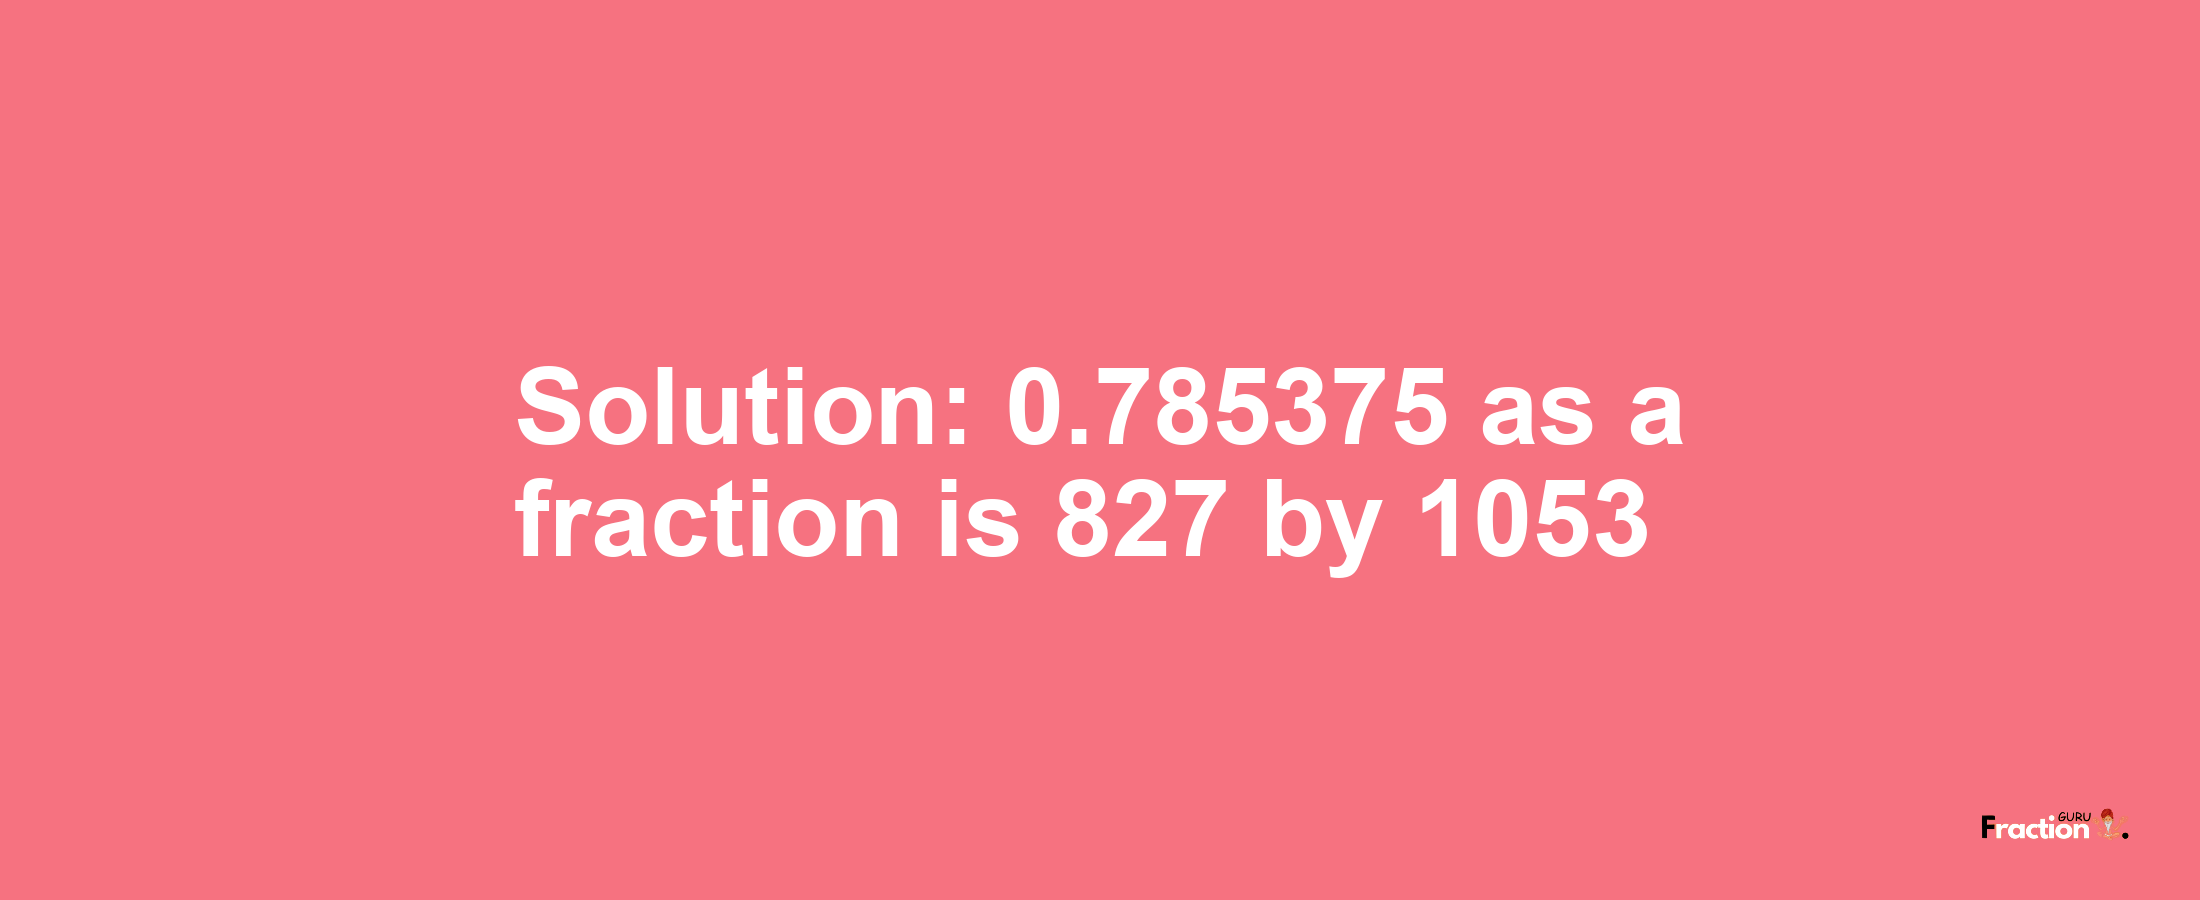 Solution:0.785375 as a fraction is 827/1053